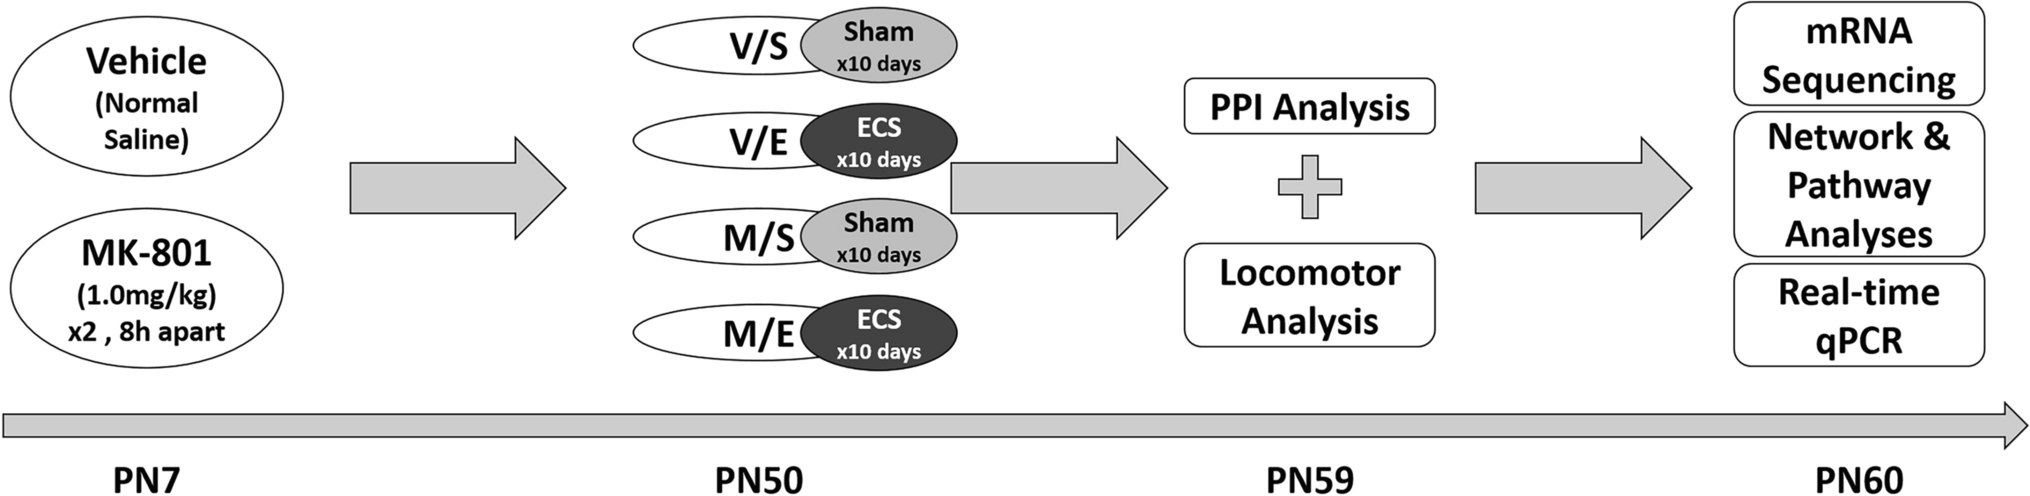 Behavioral and transcriptional effects of repeated electroconvulsive seizures in the neonatal MK-801-treated rat model of schizophrenia